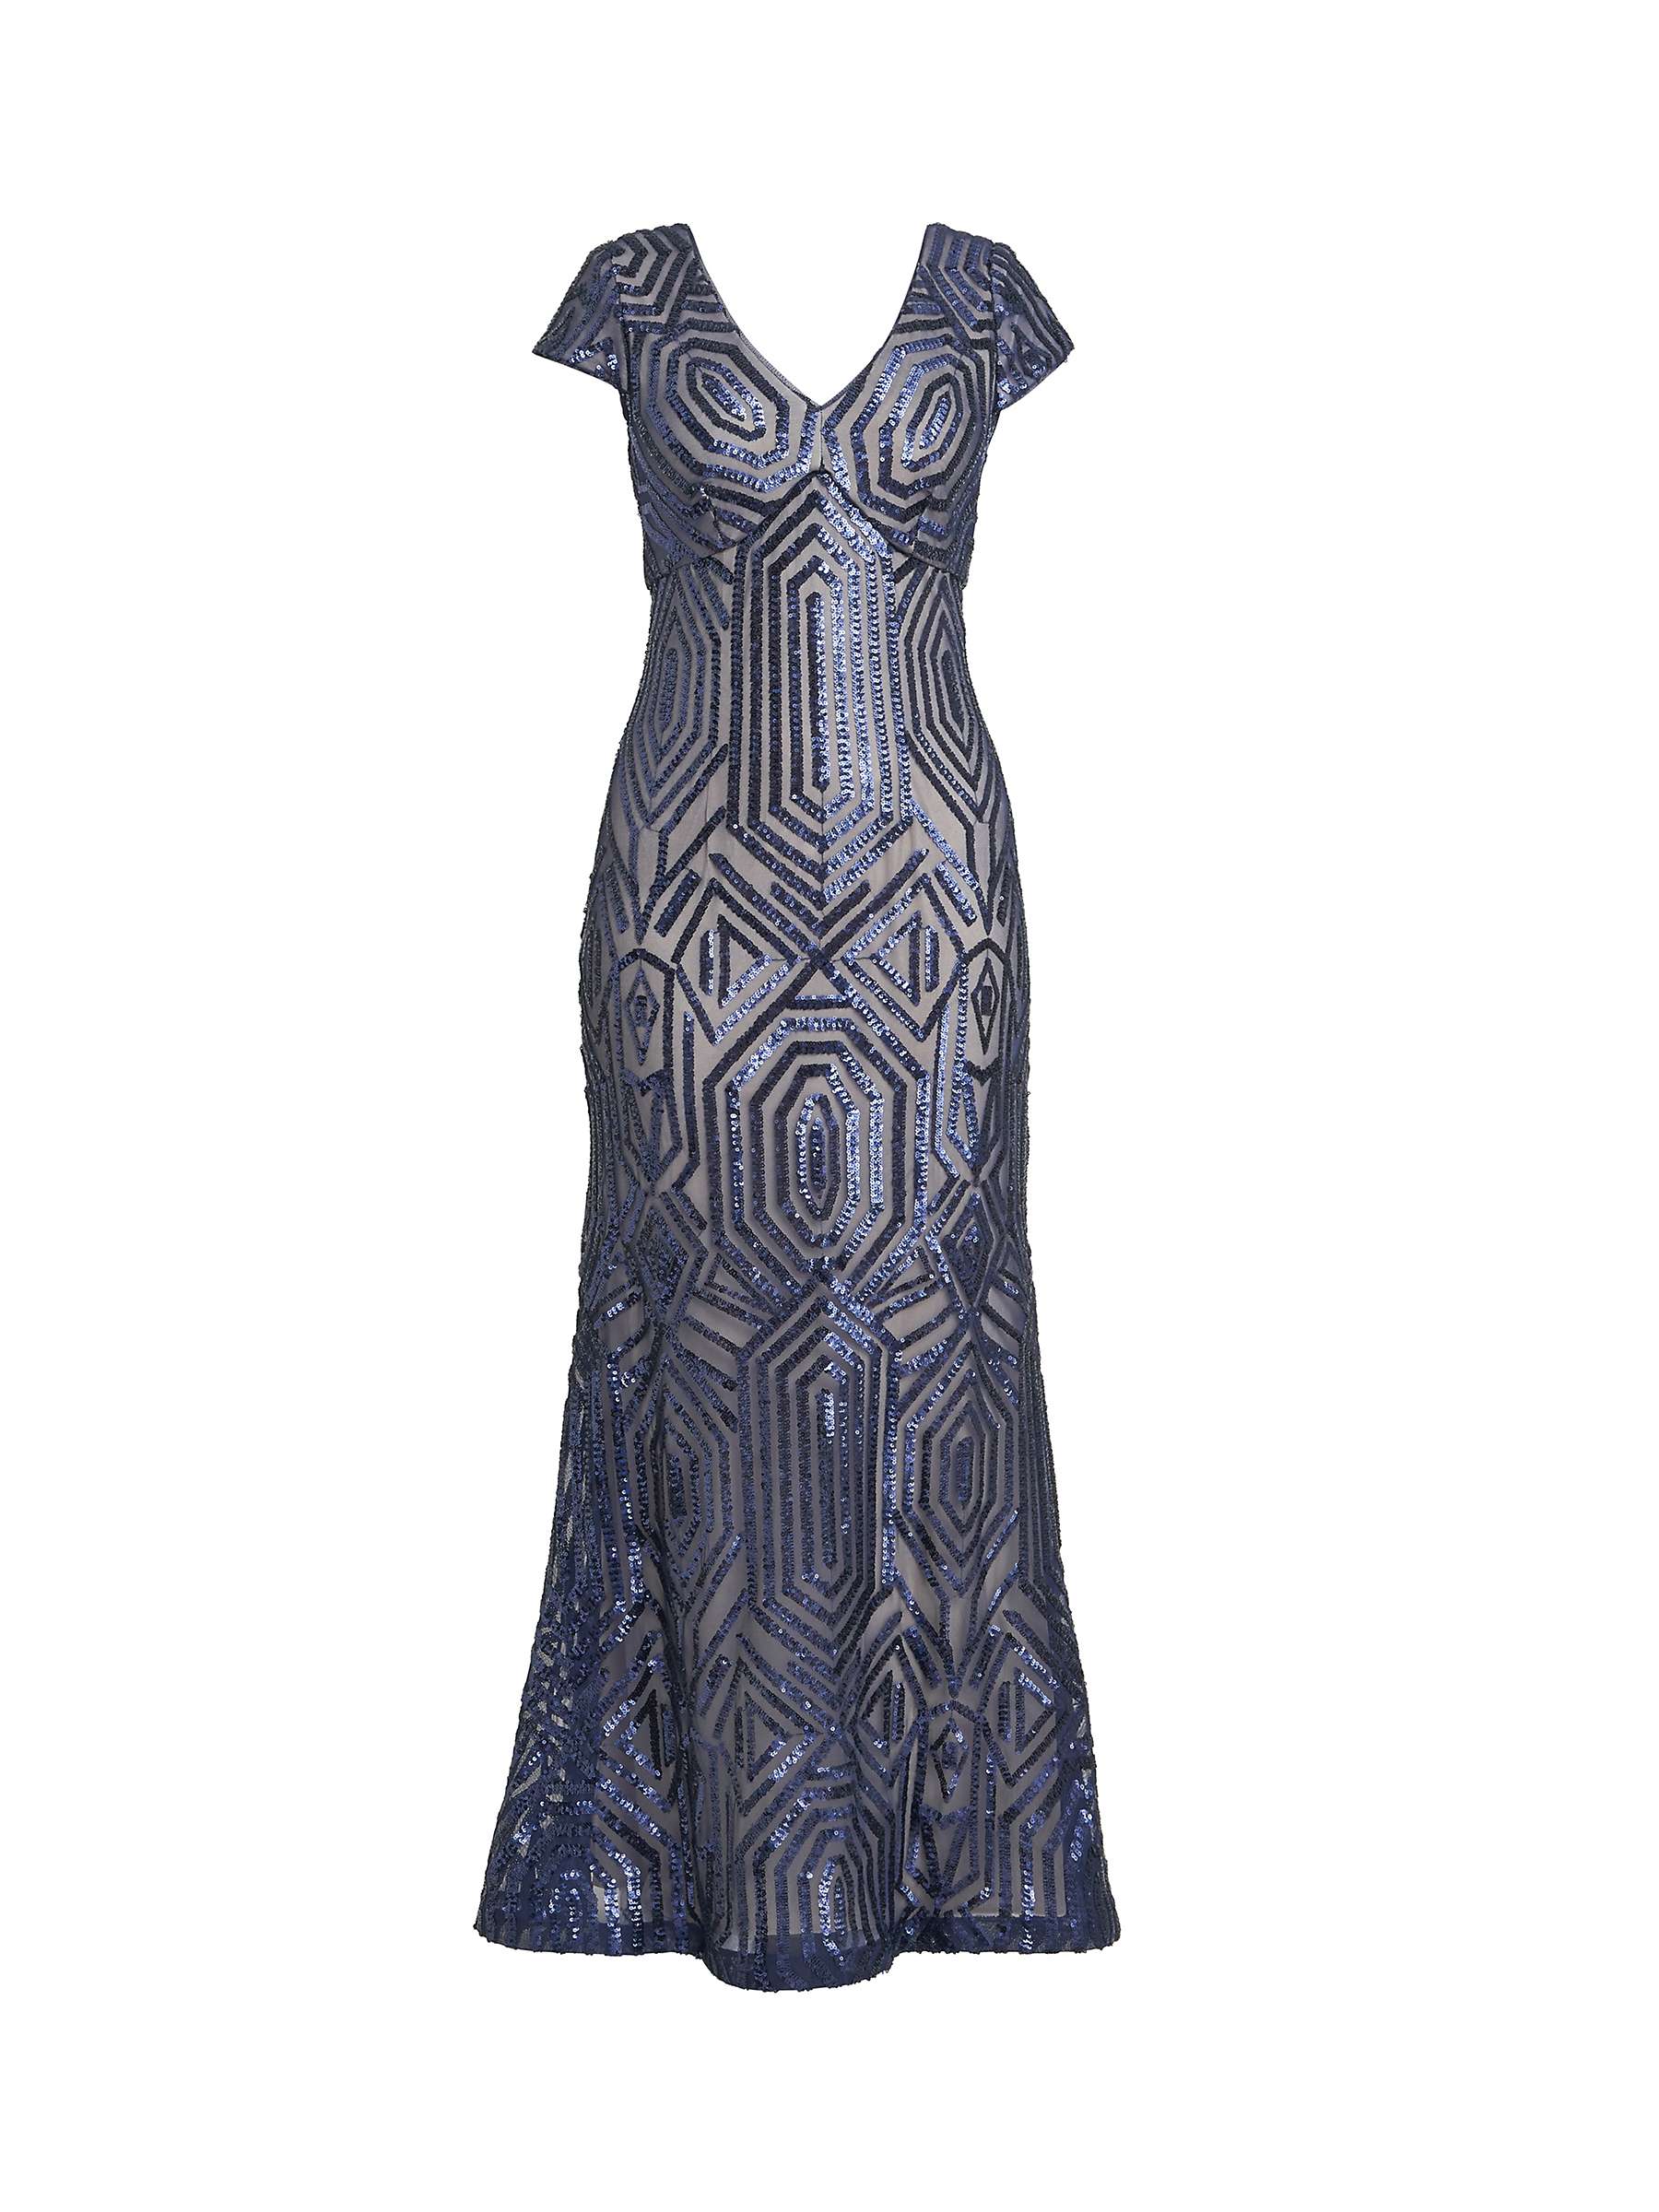 Buy Gina Bacconi Marcia Sequin Gown, Navy/Nude Online at johnlewis.com